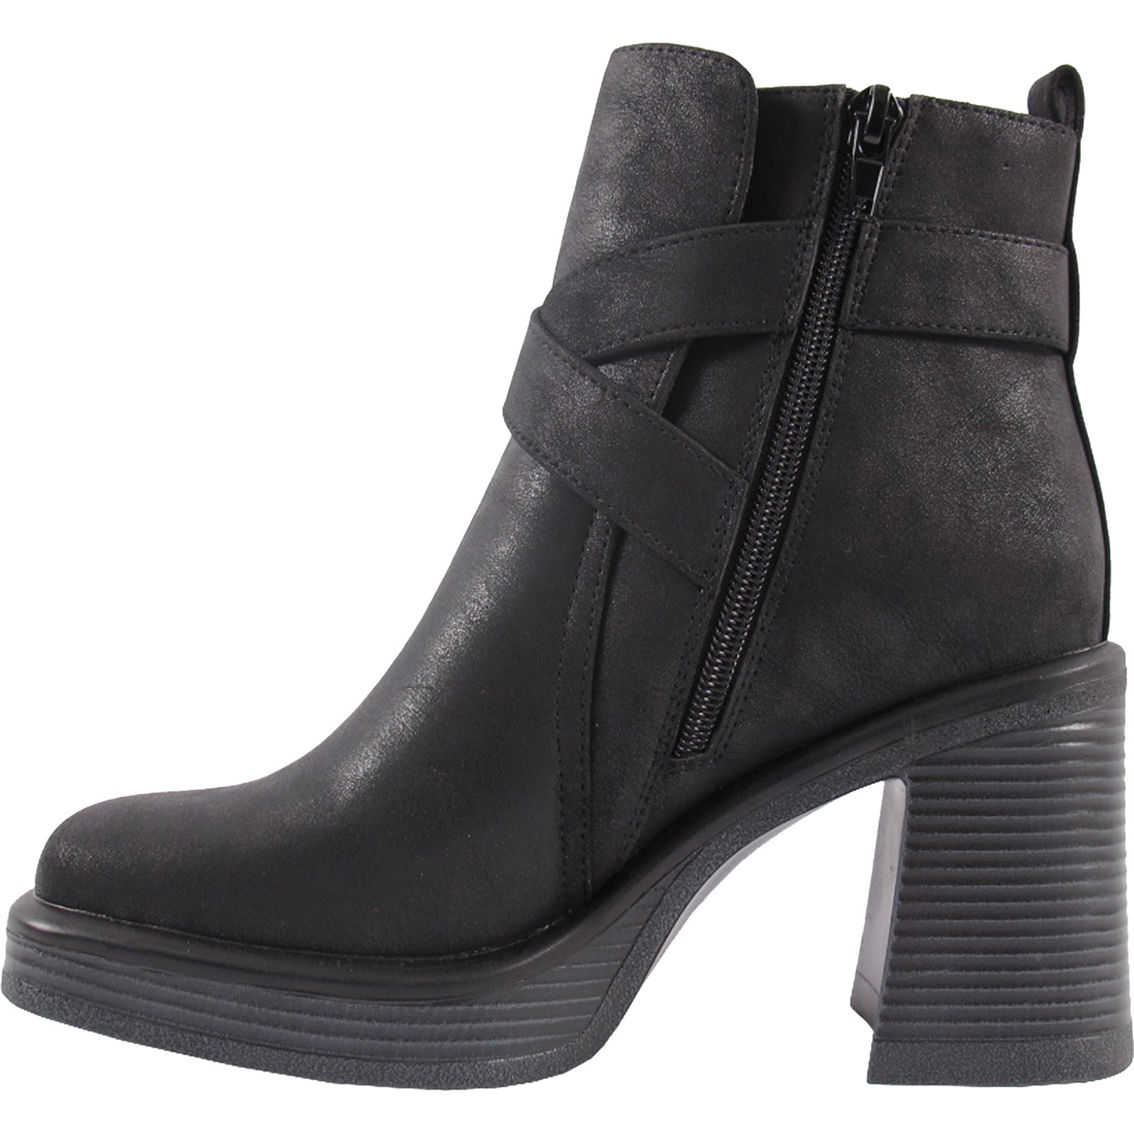 Jellypop Eugenie Boots - Image 3 of 7